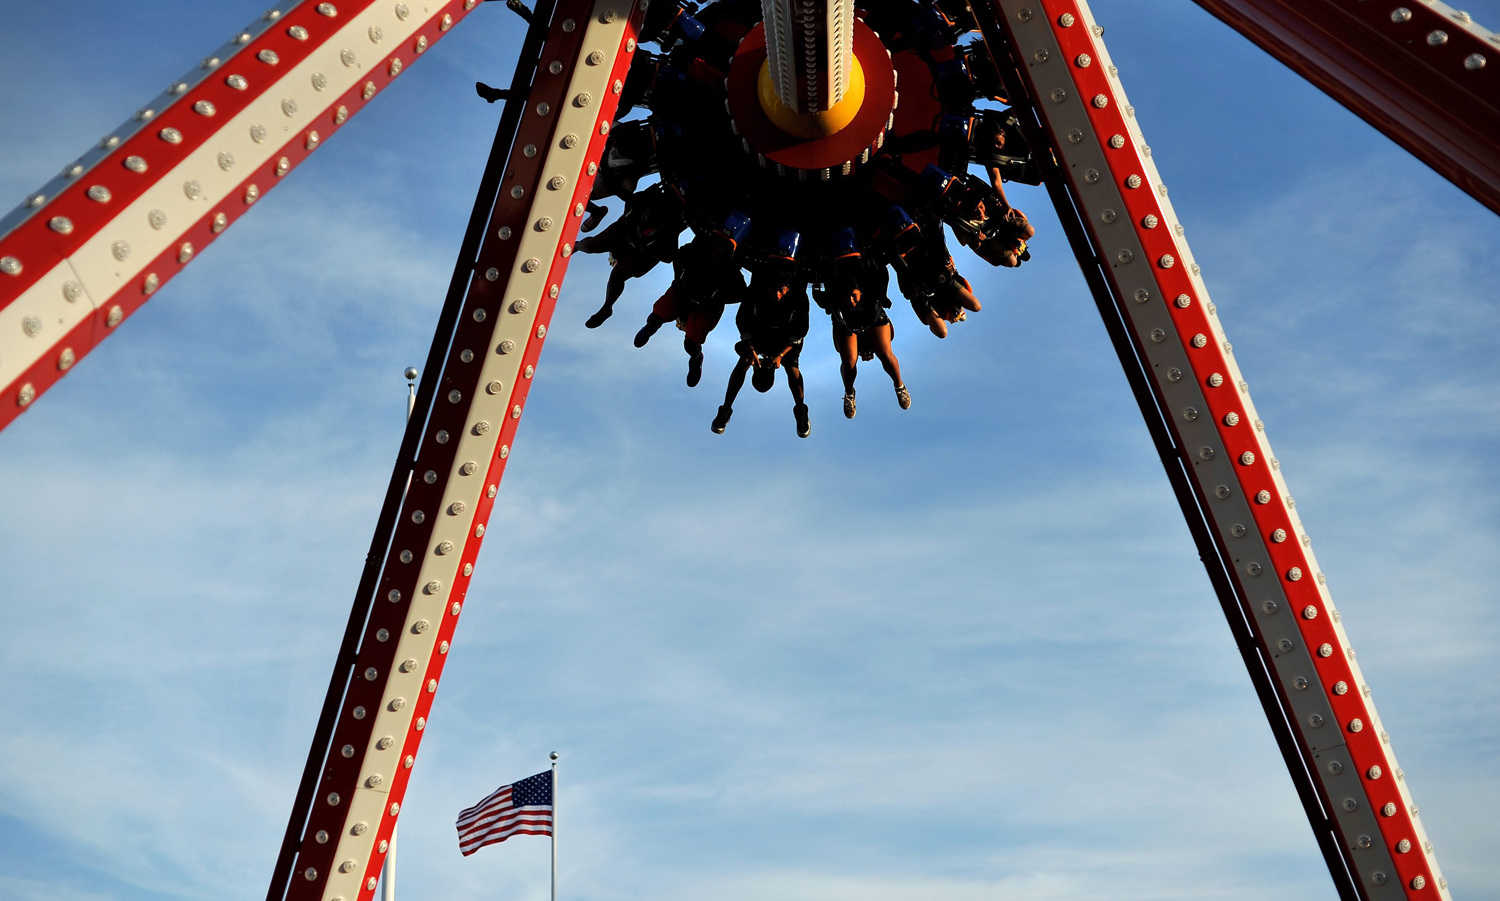 A group of people are flipped upside down the Luna 360, an amusement ride at Coney Island in Brooklyn, N.Y., on May 26, 2014.